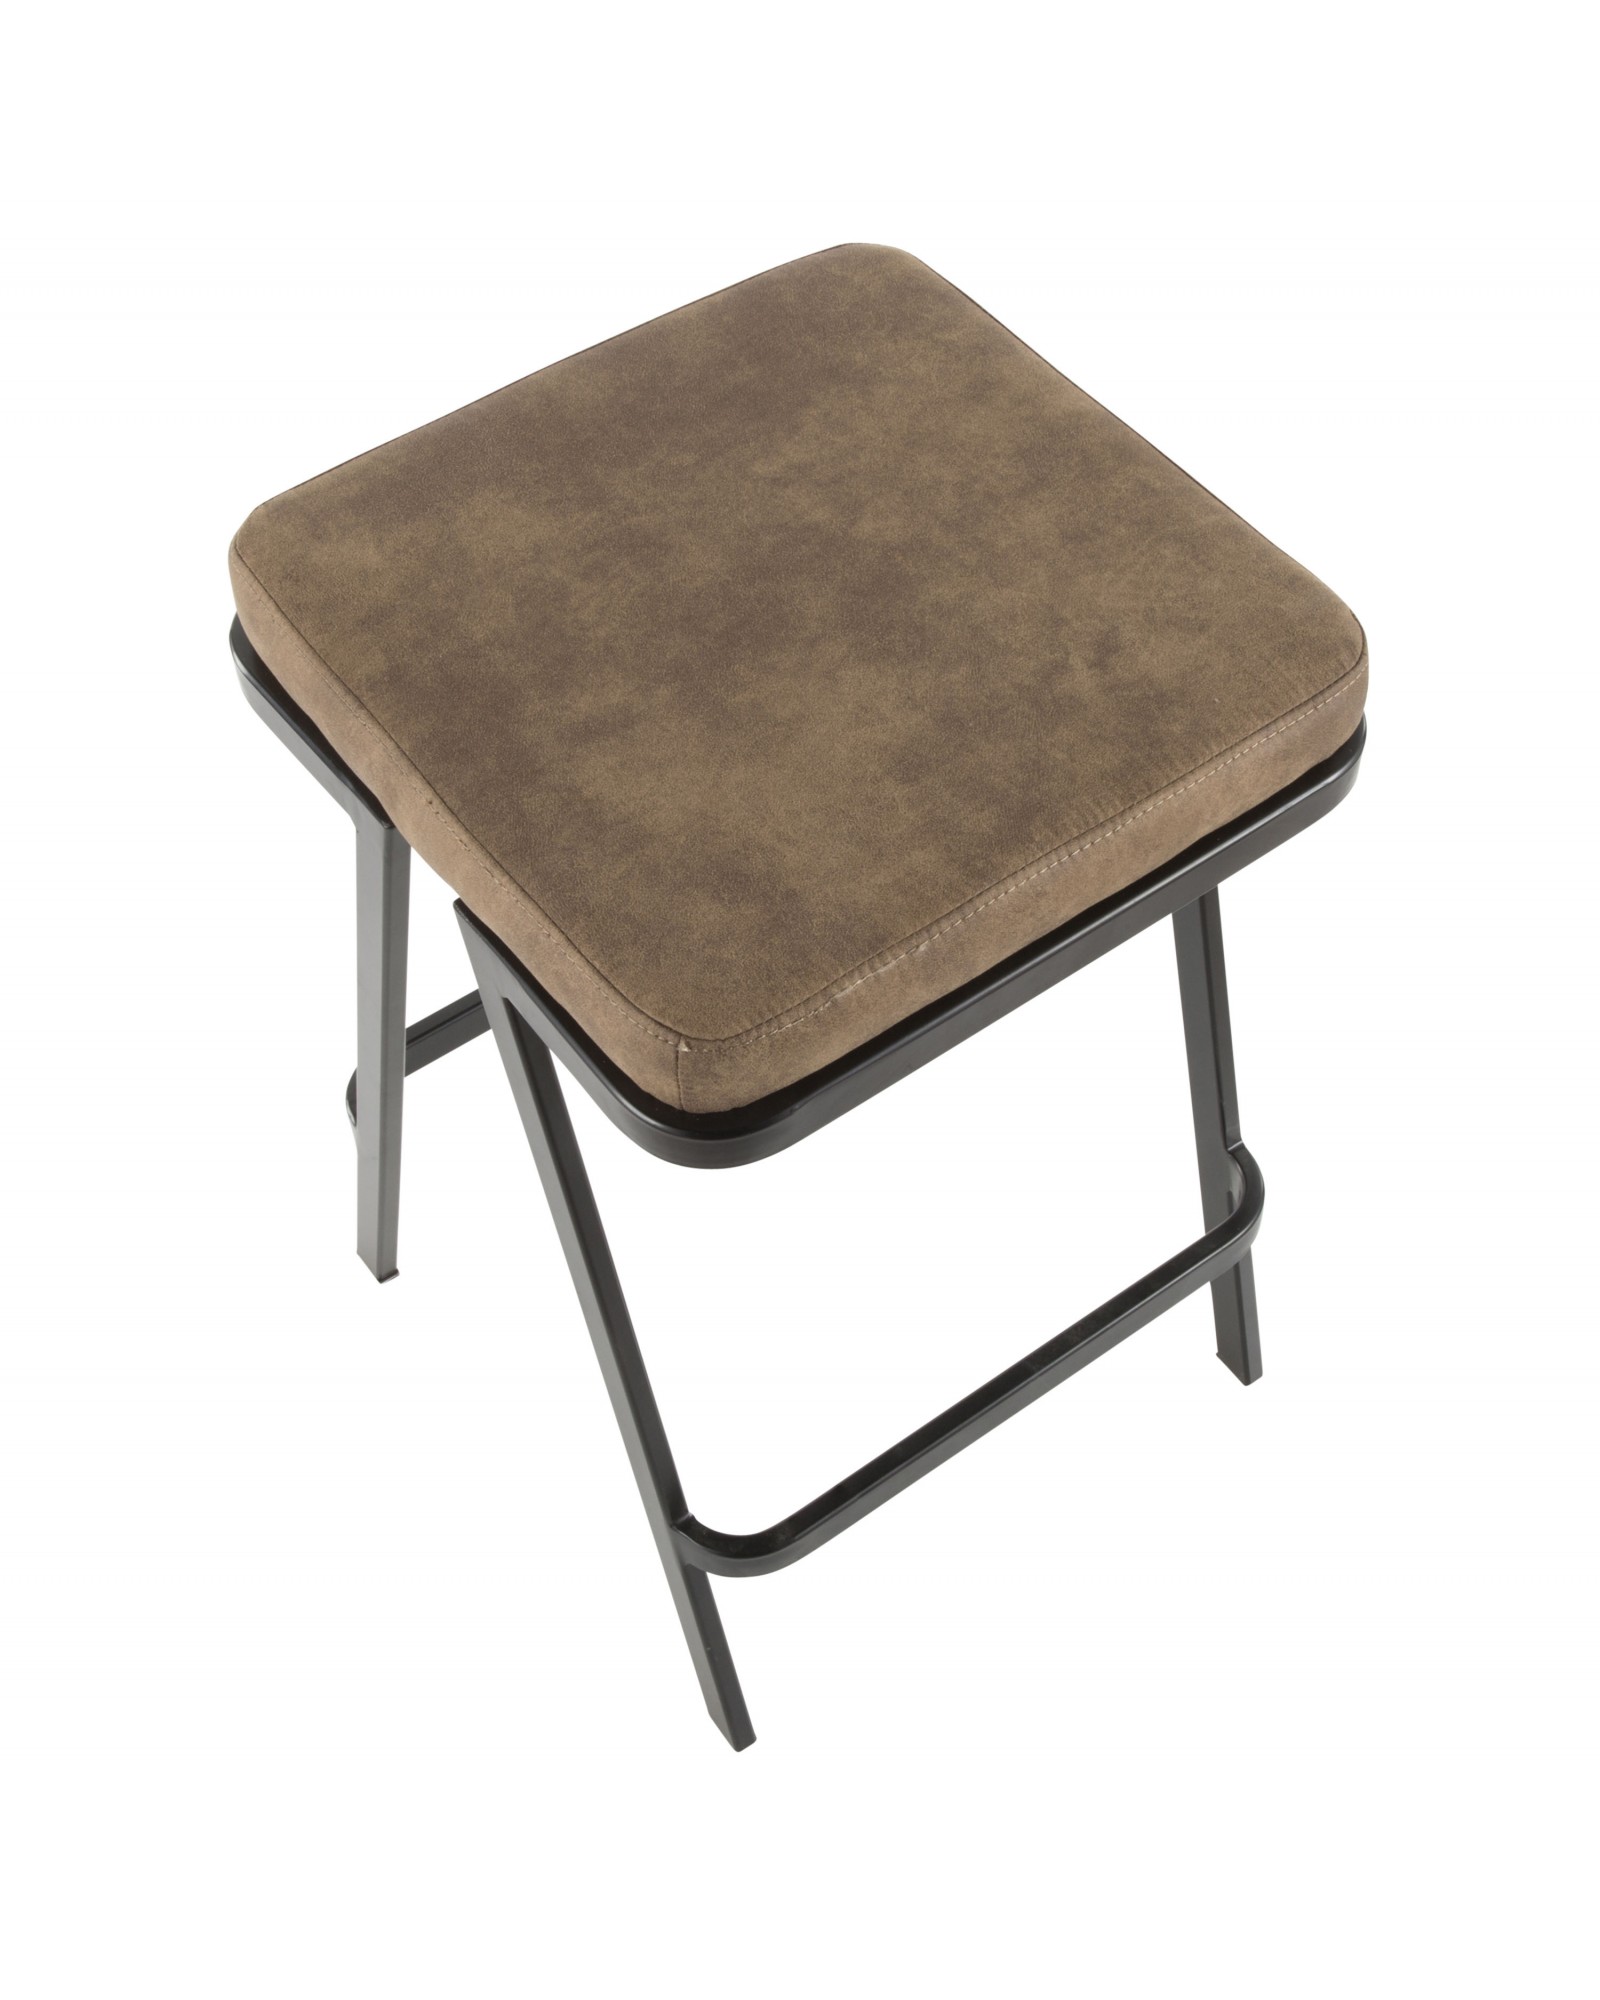 Seven Industrial Counter Stool in Black Metal and Brown Cowboy Fabric